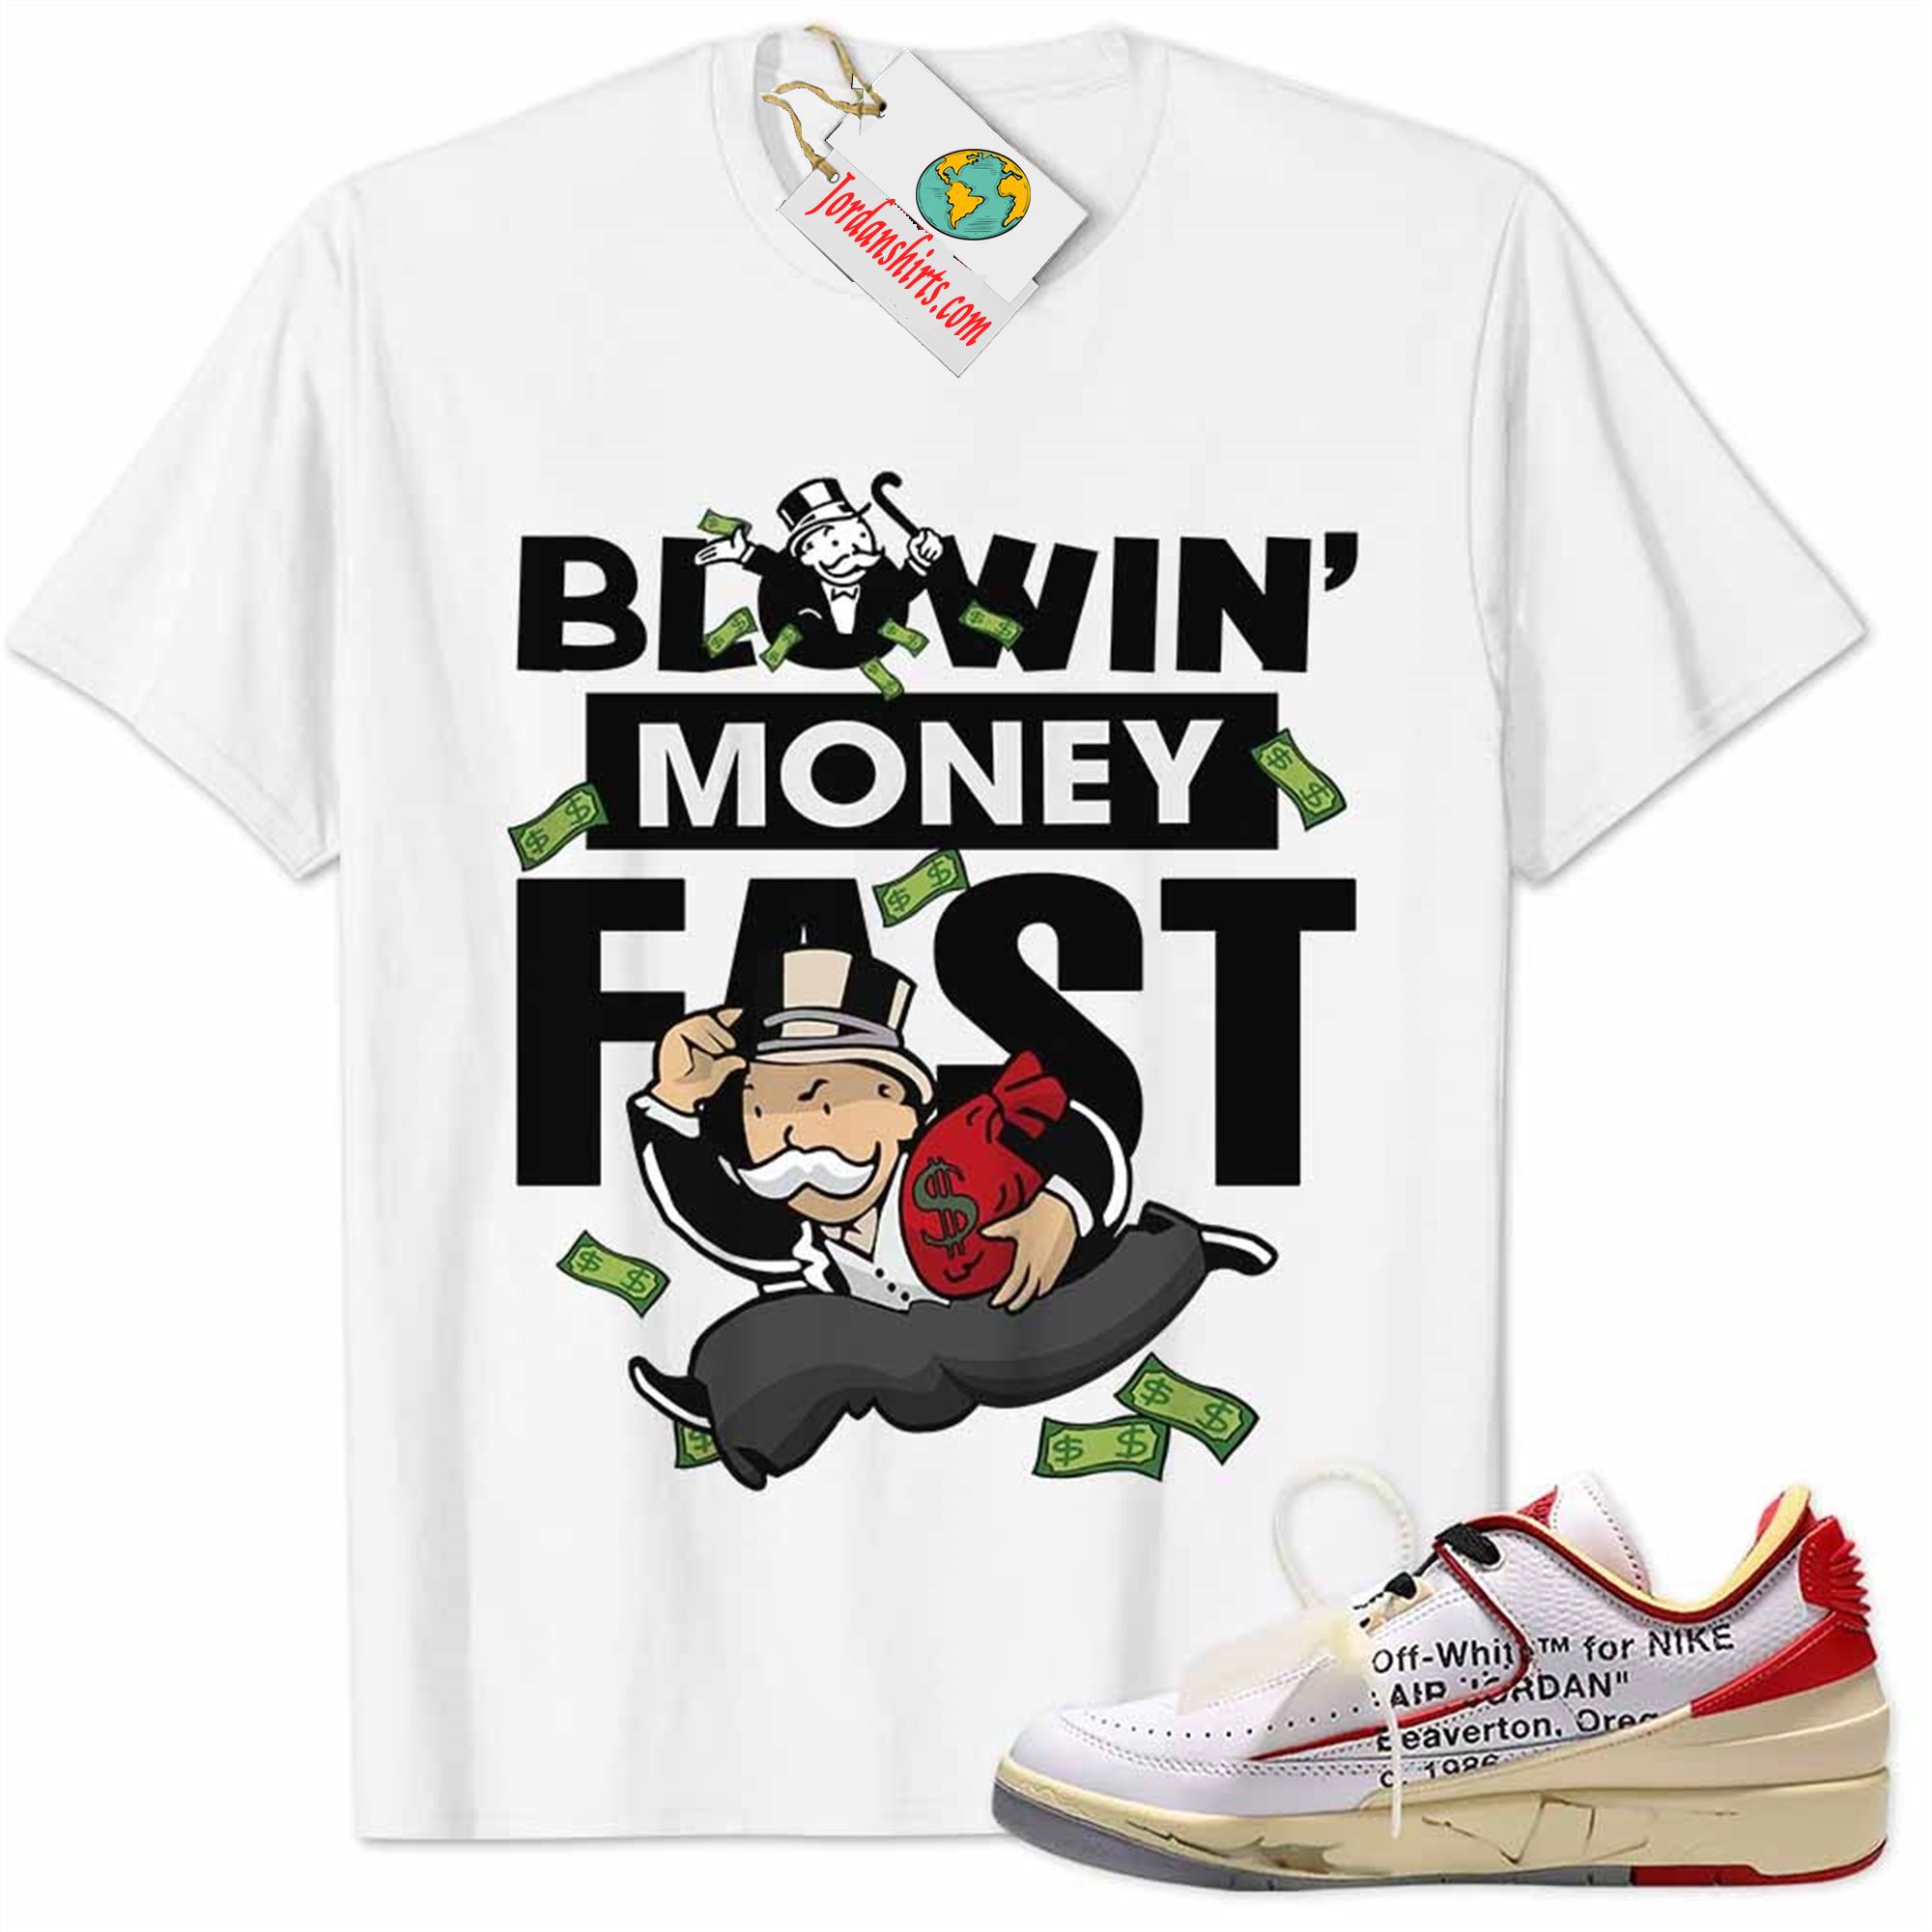 Jordan 2 Shirt, Low White Red Off-white 2s Shirt Blowin Money Fast Mr Monopoly White Size Up To 5xl